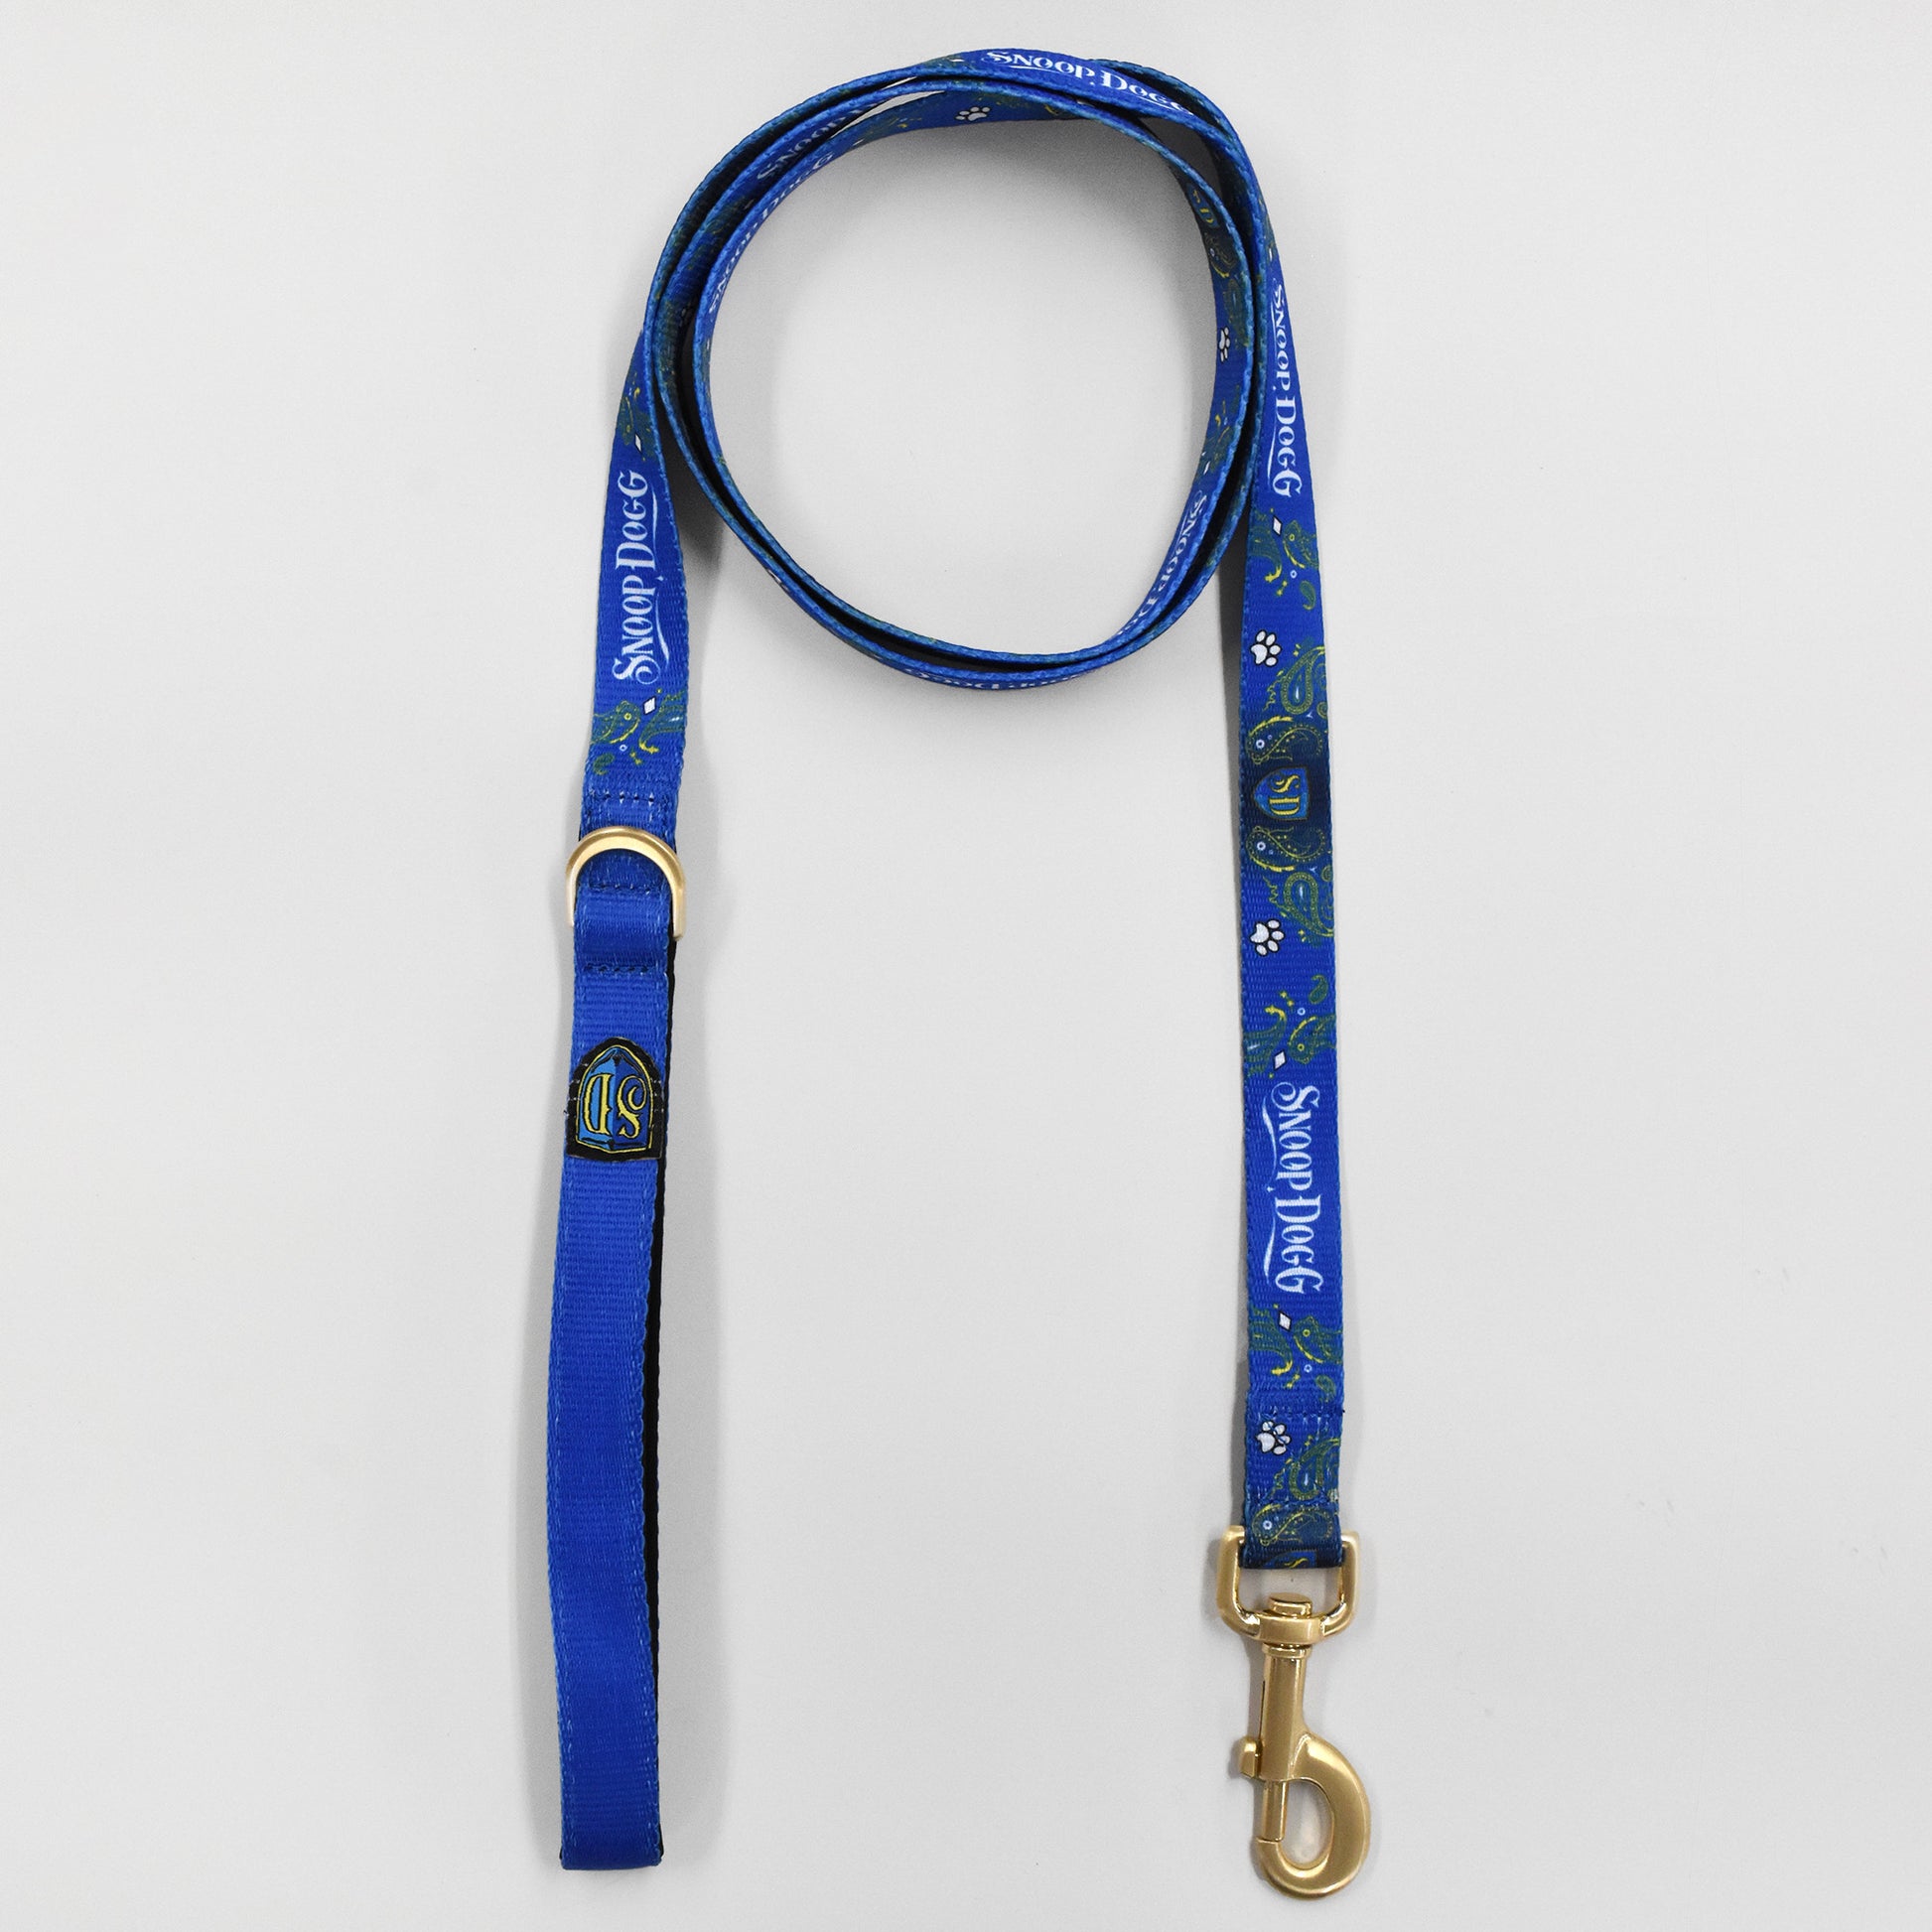 Product flat lay of the Halftime Deluxe Pet Lead.